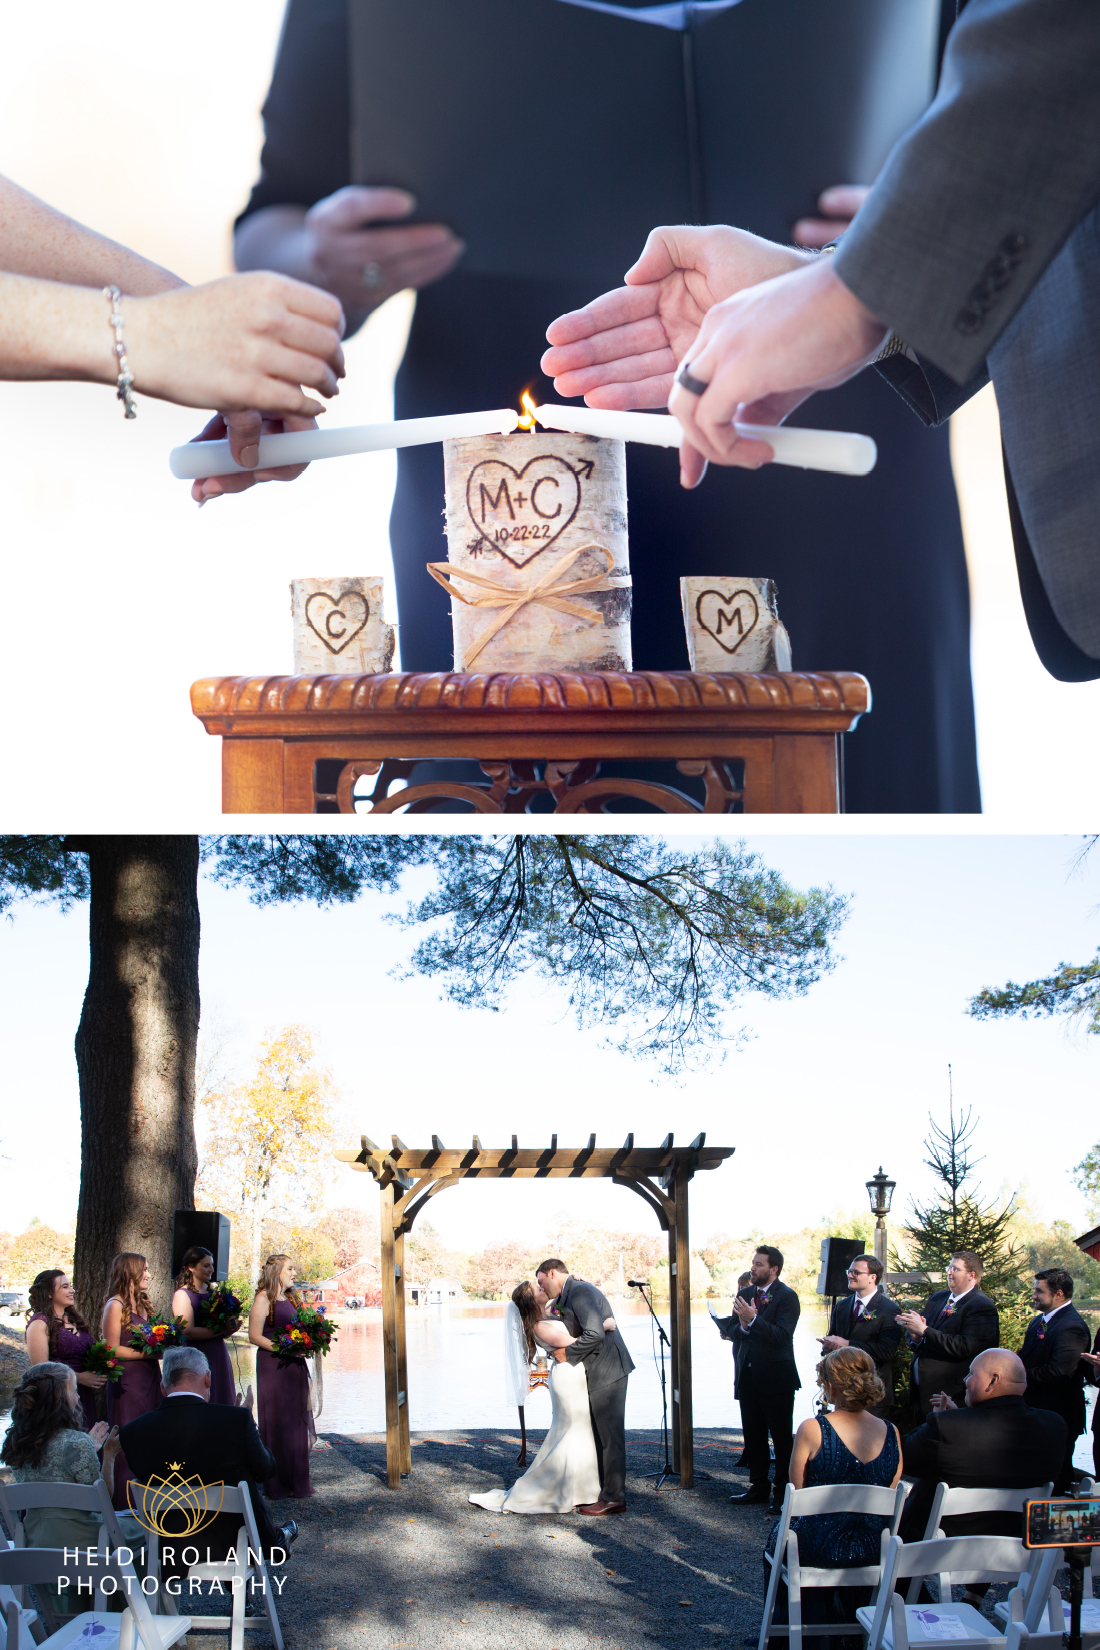 Bride and groom lighting candle during wedding ceremony in PA wedding 